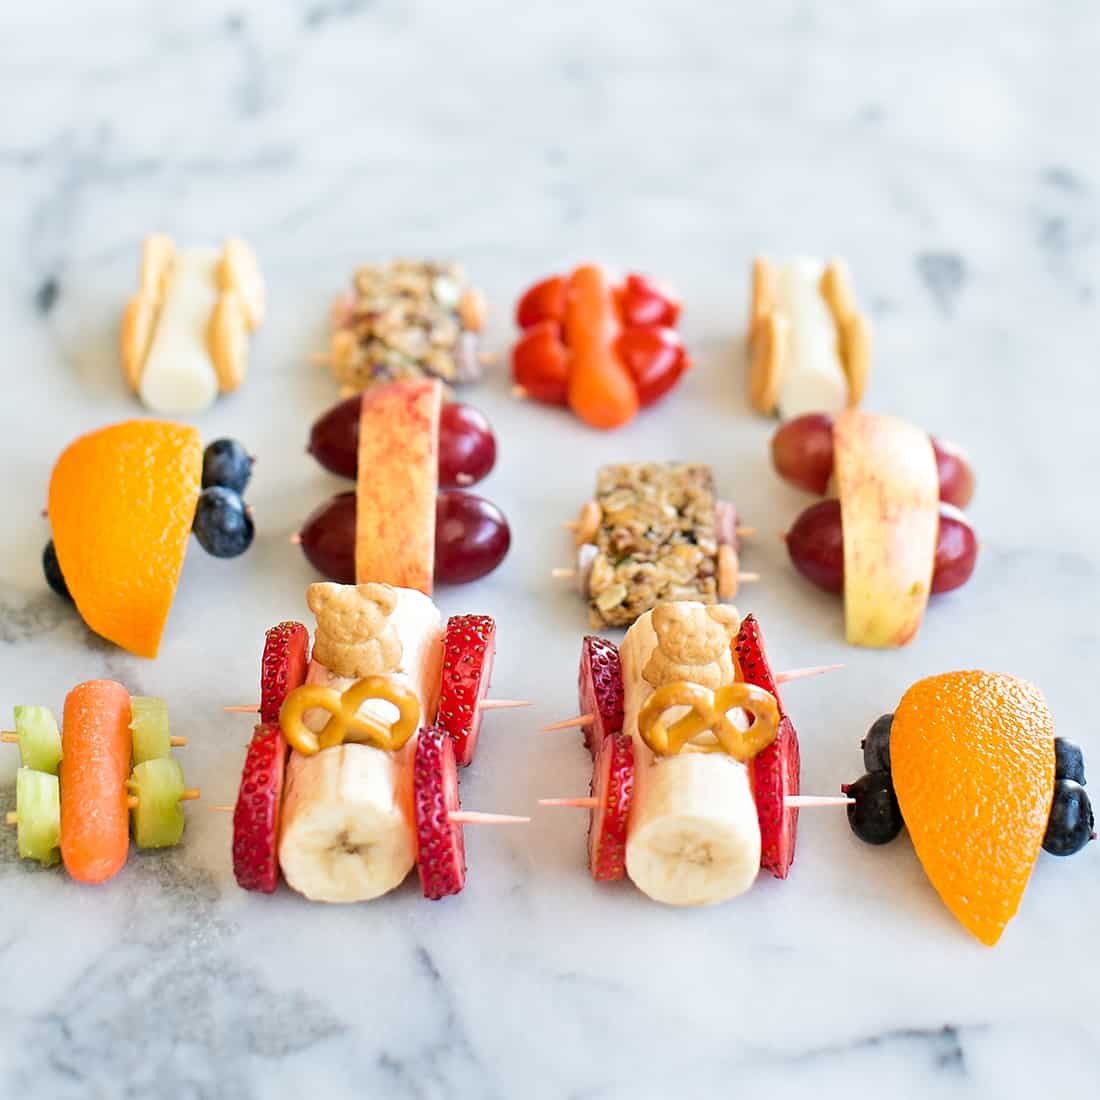 20 Fruit and Veggie Foods Too Cute To Eat